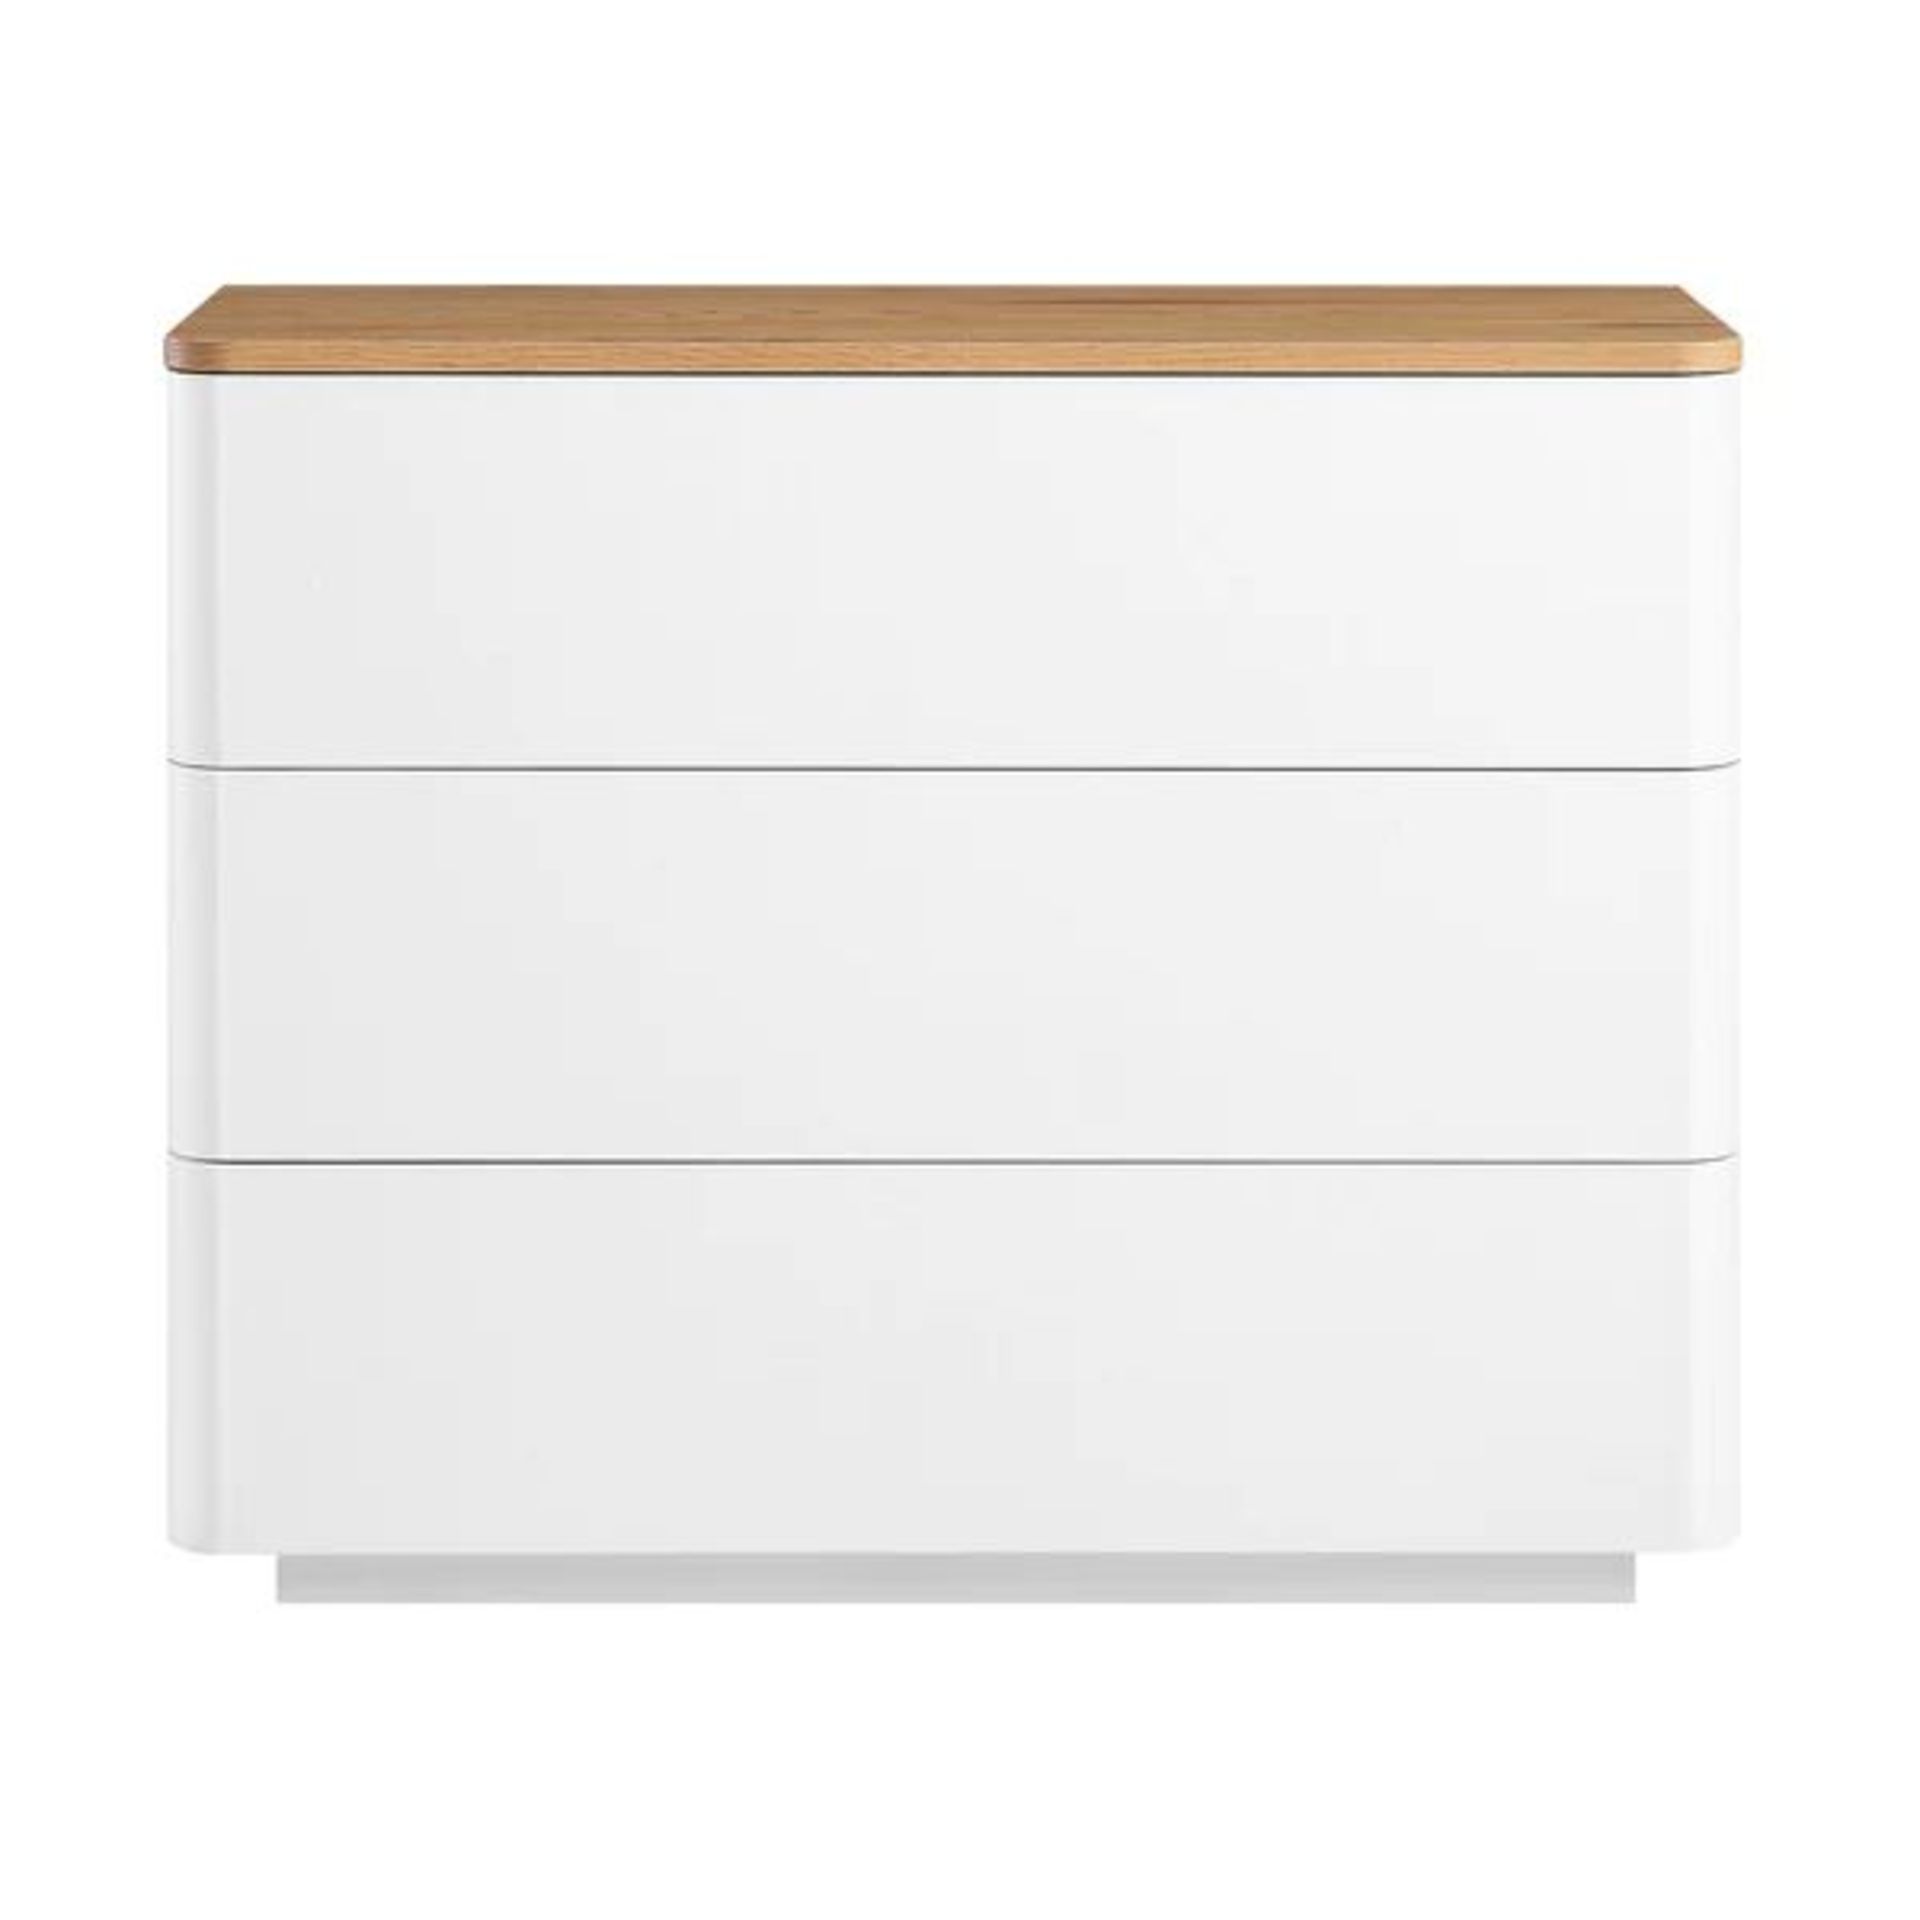 Agnes Curved Edge Chest of 3 Drawers. - ER31. RRP £199.99. The chest offers 3 decent sized drawers - Image 2 of 2